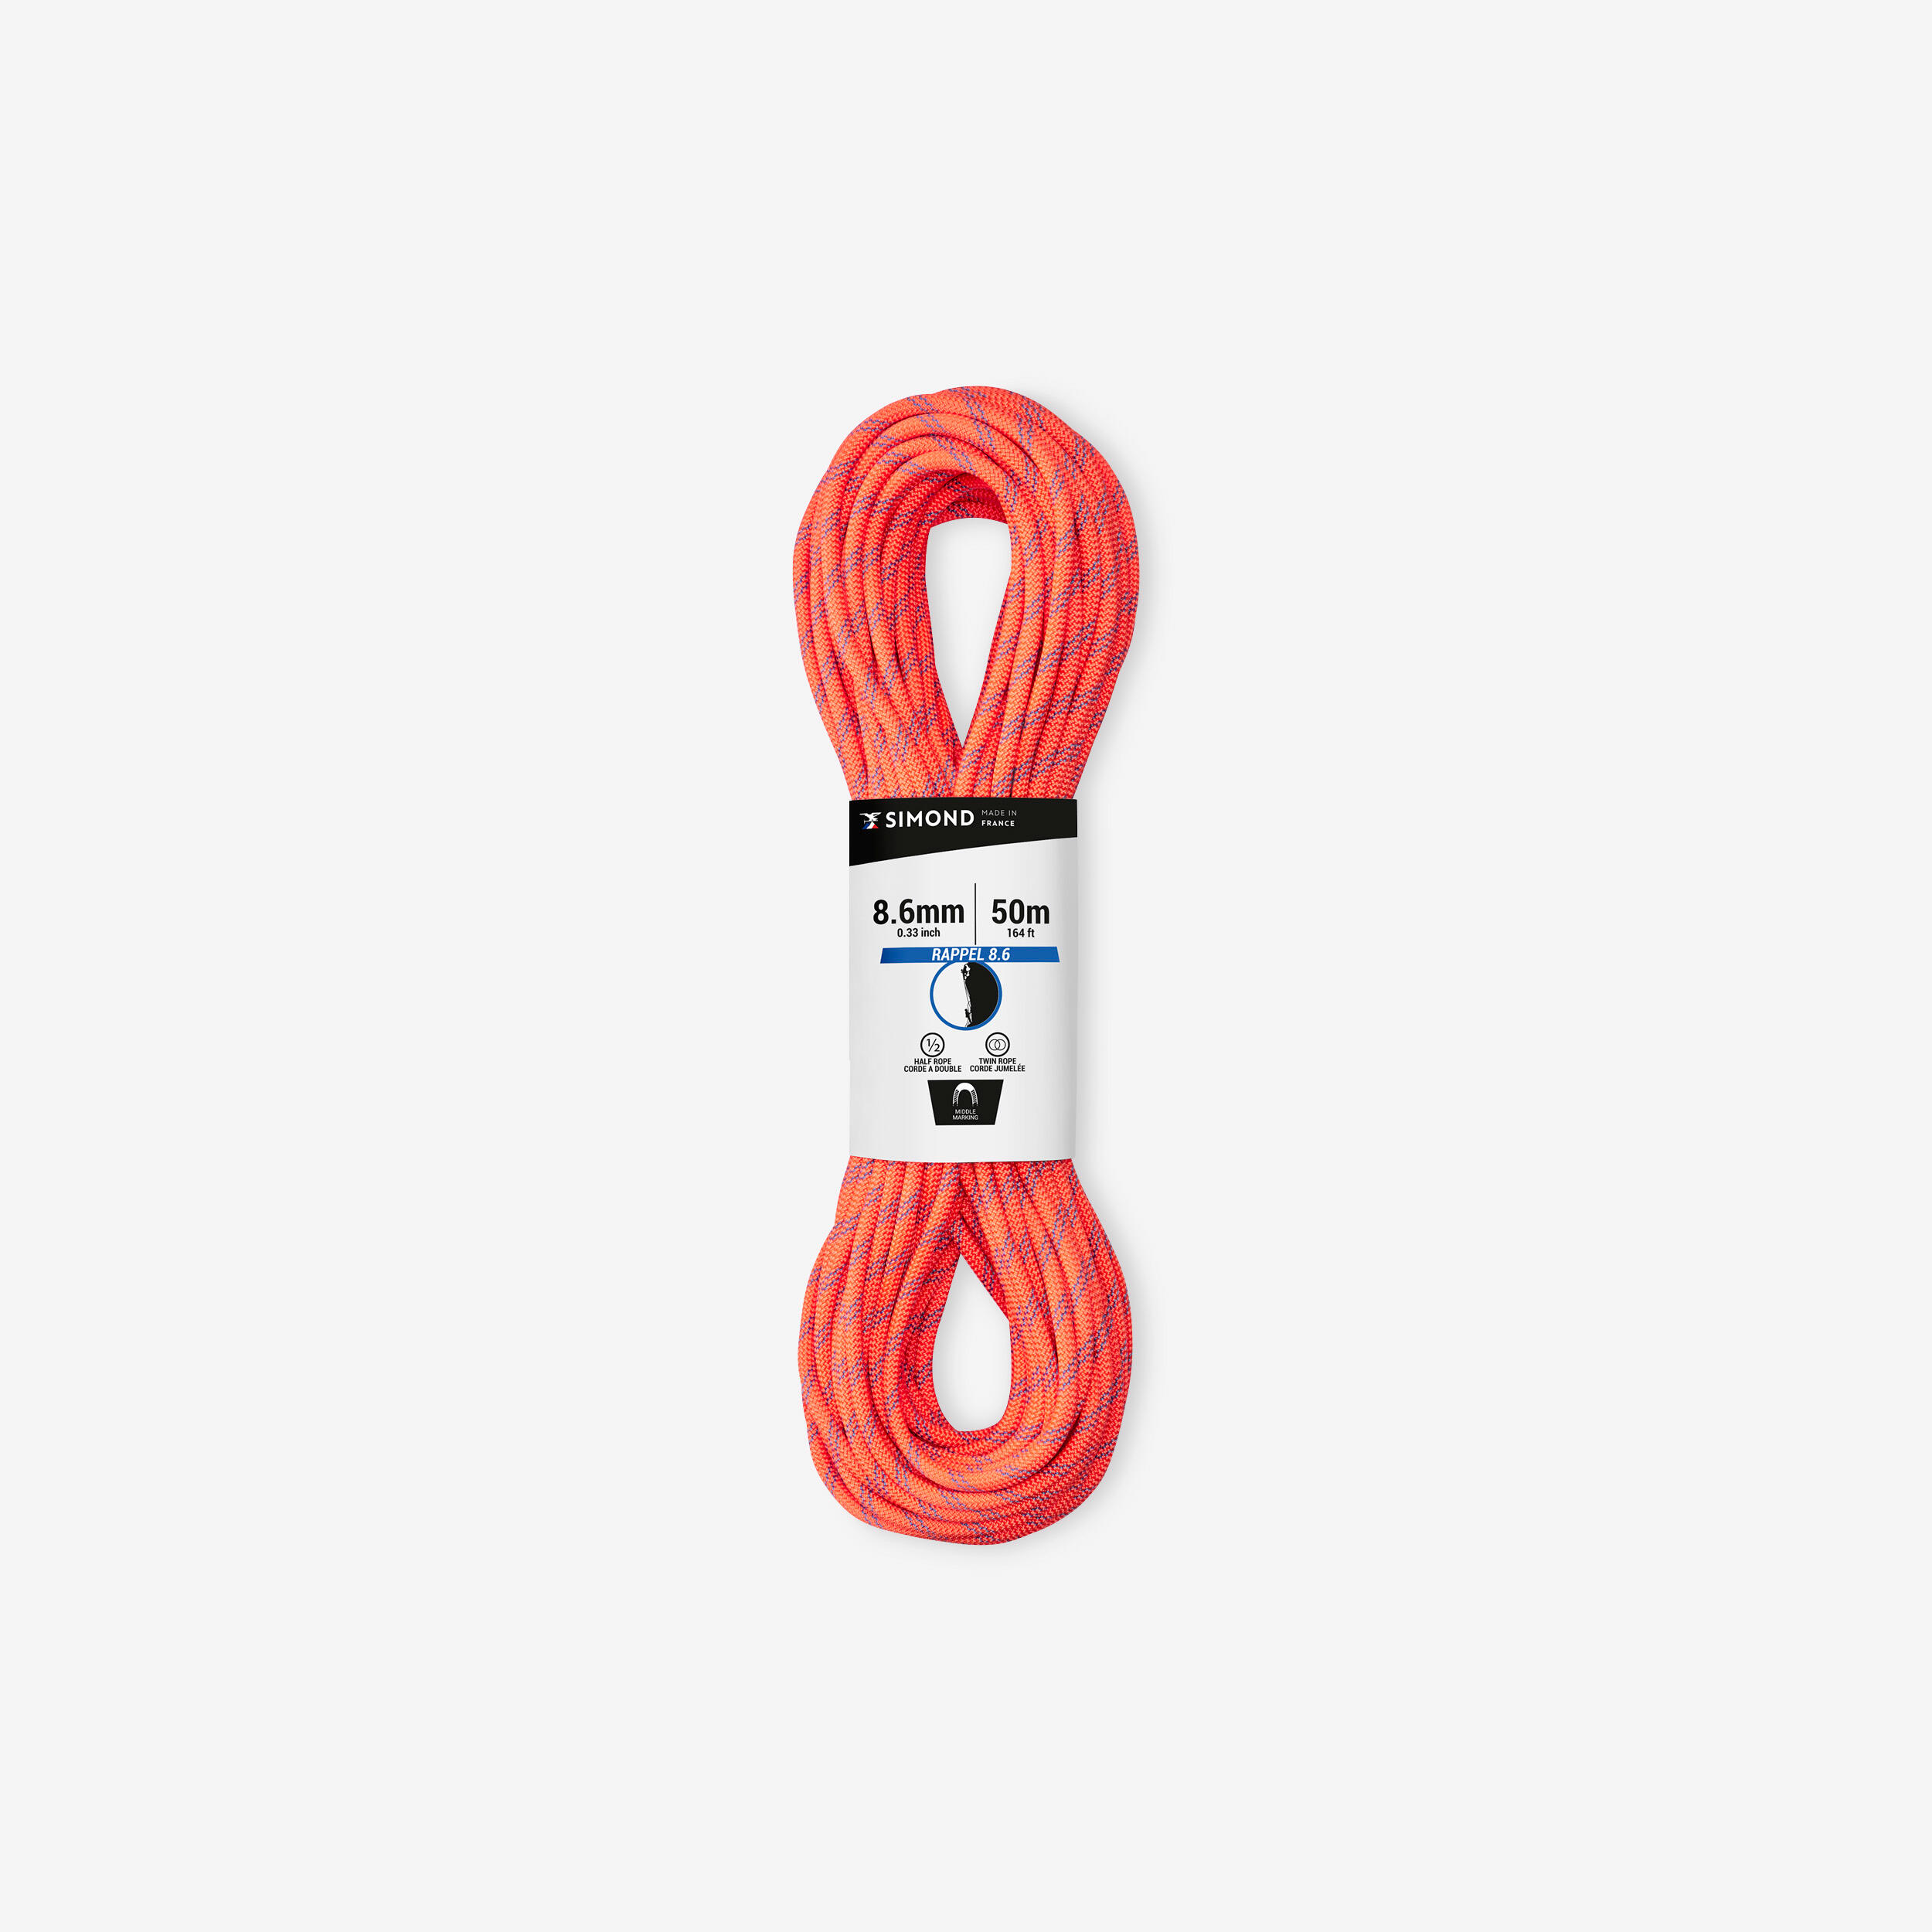 Climbing and mountaineering half rope 8.6 mm x 50 m - RAPPEL 8.6 orange 1/6